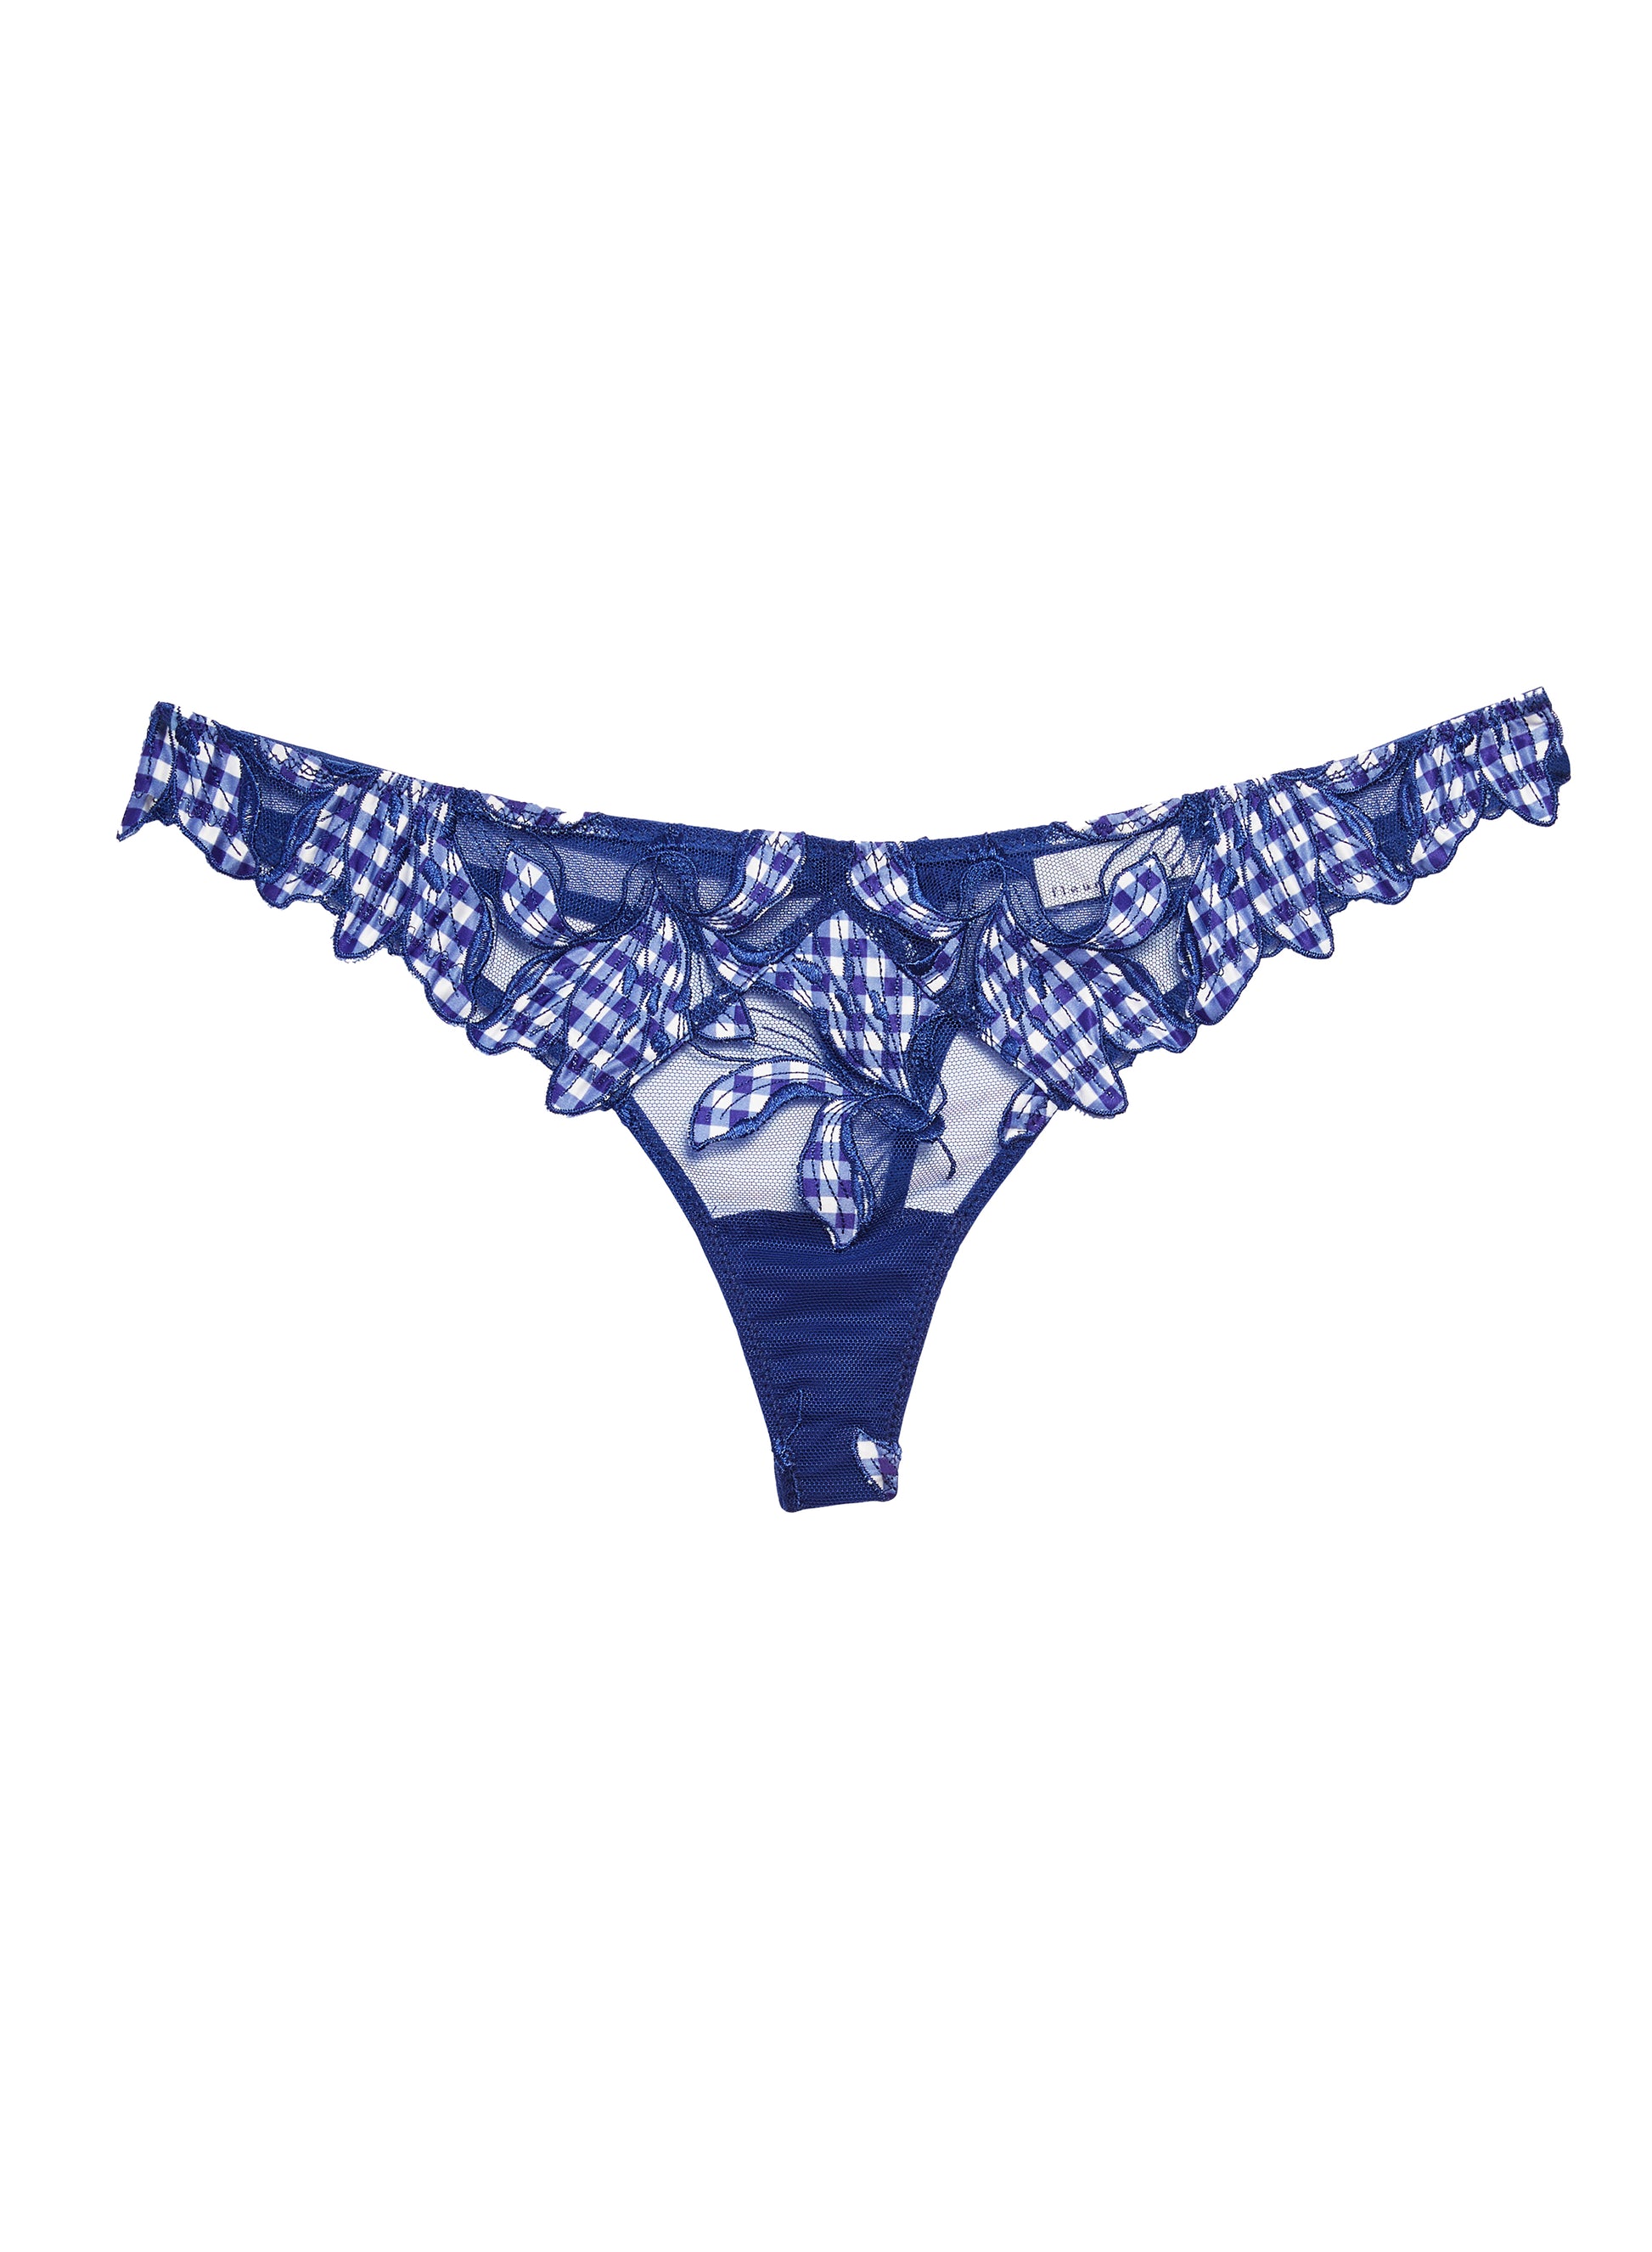 Lily Embroidery Hipster Thong by Fleur du Mal at ORCHARD MILE